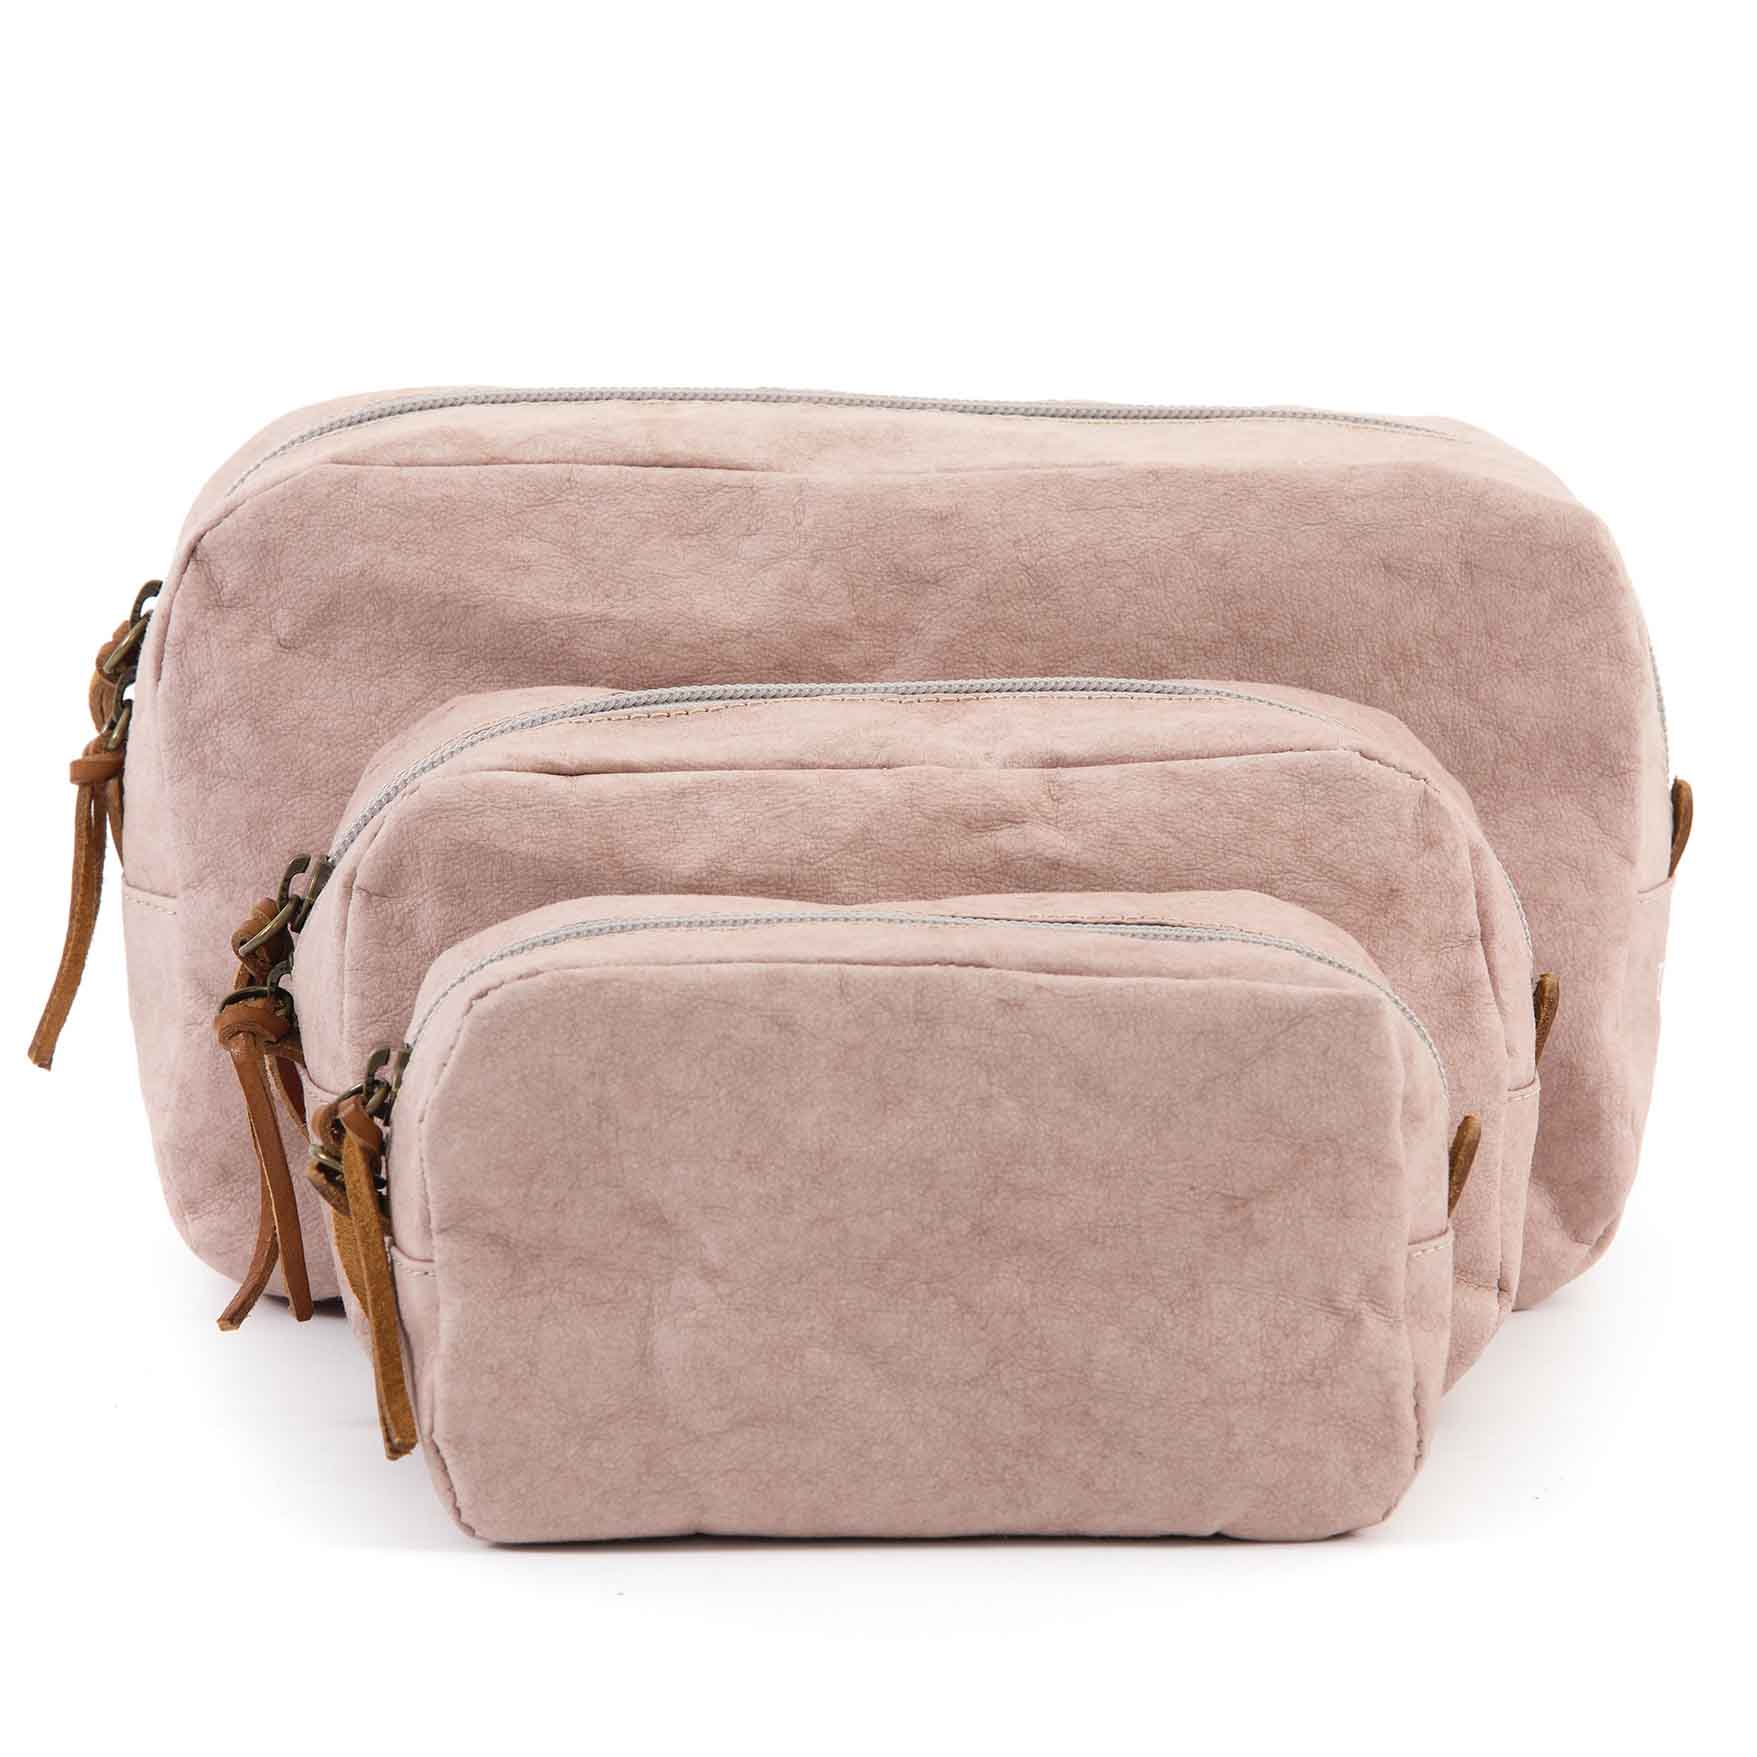 COSMETIC BAG BEAUTY CASE